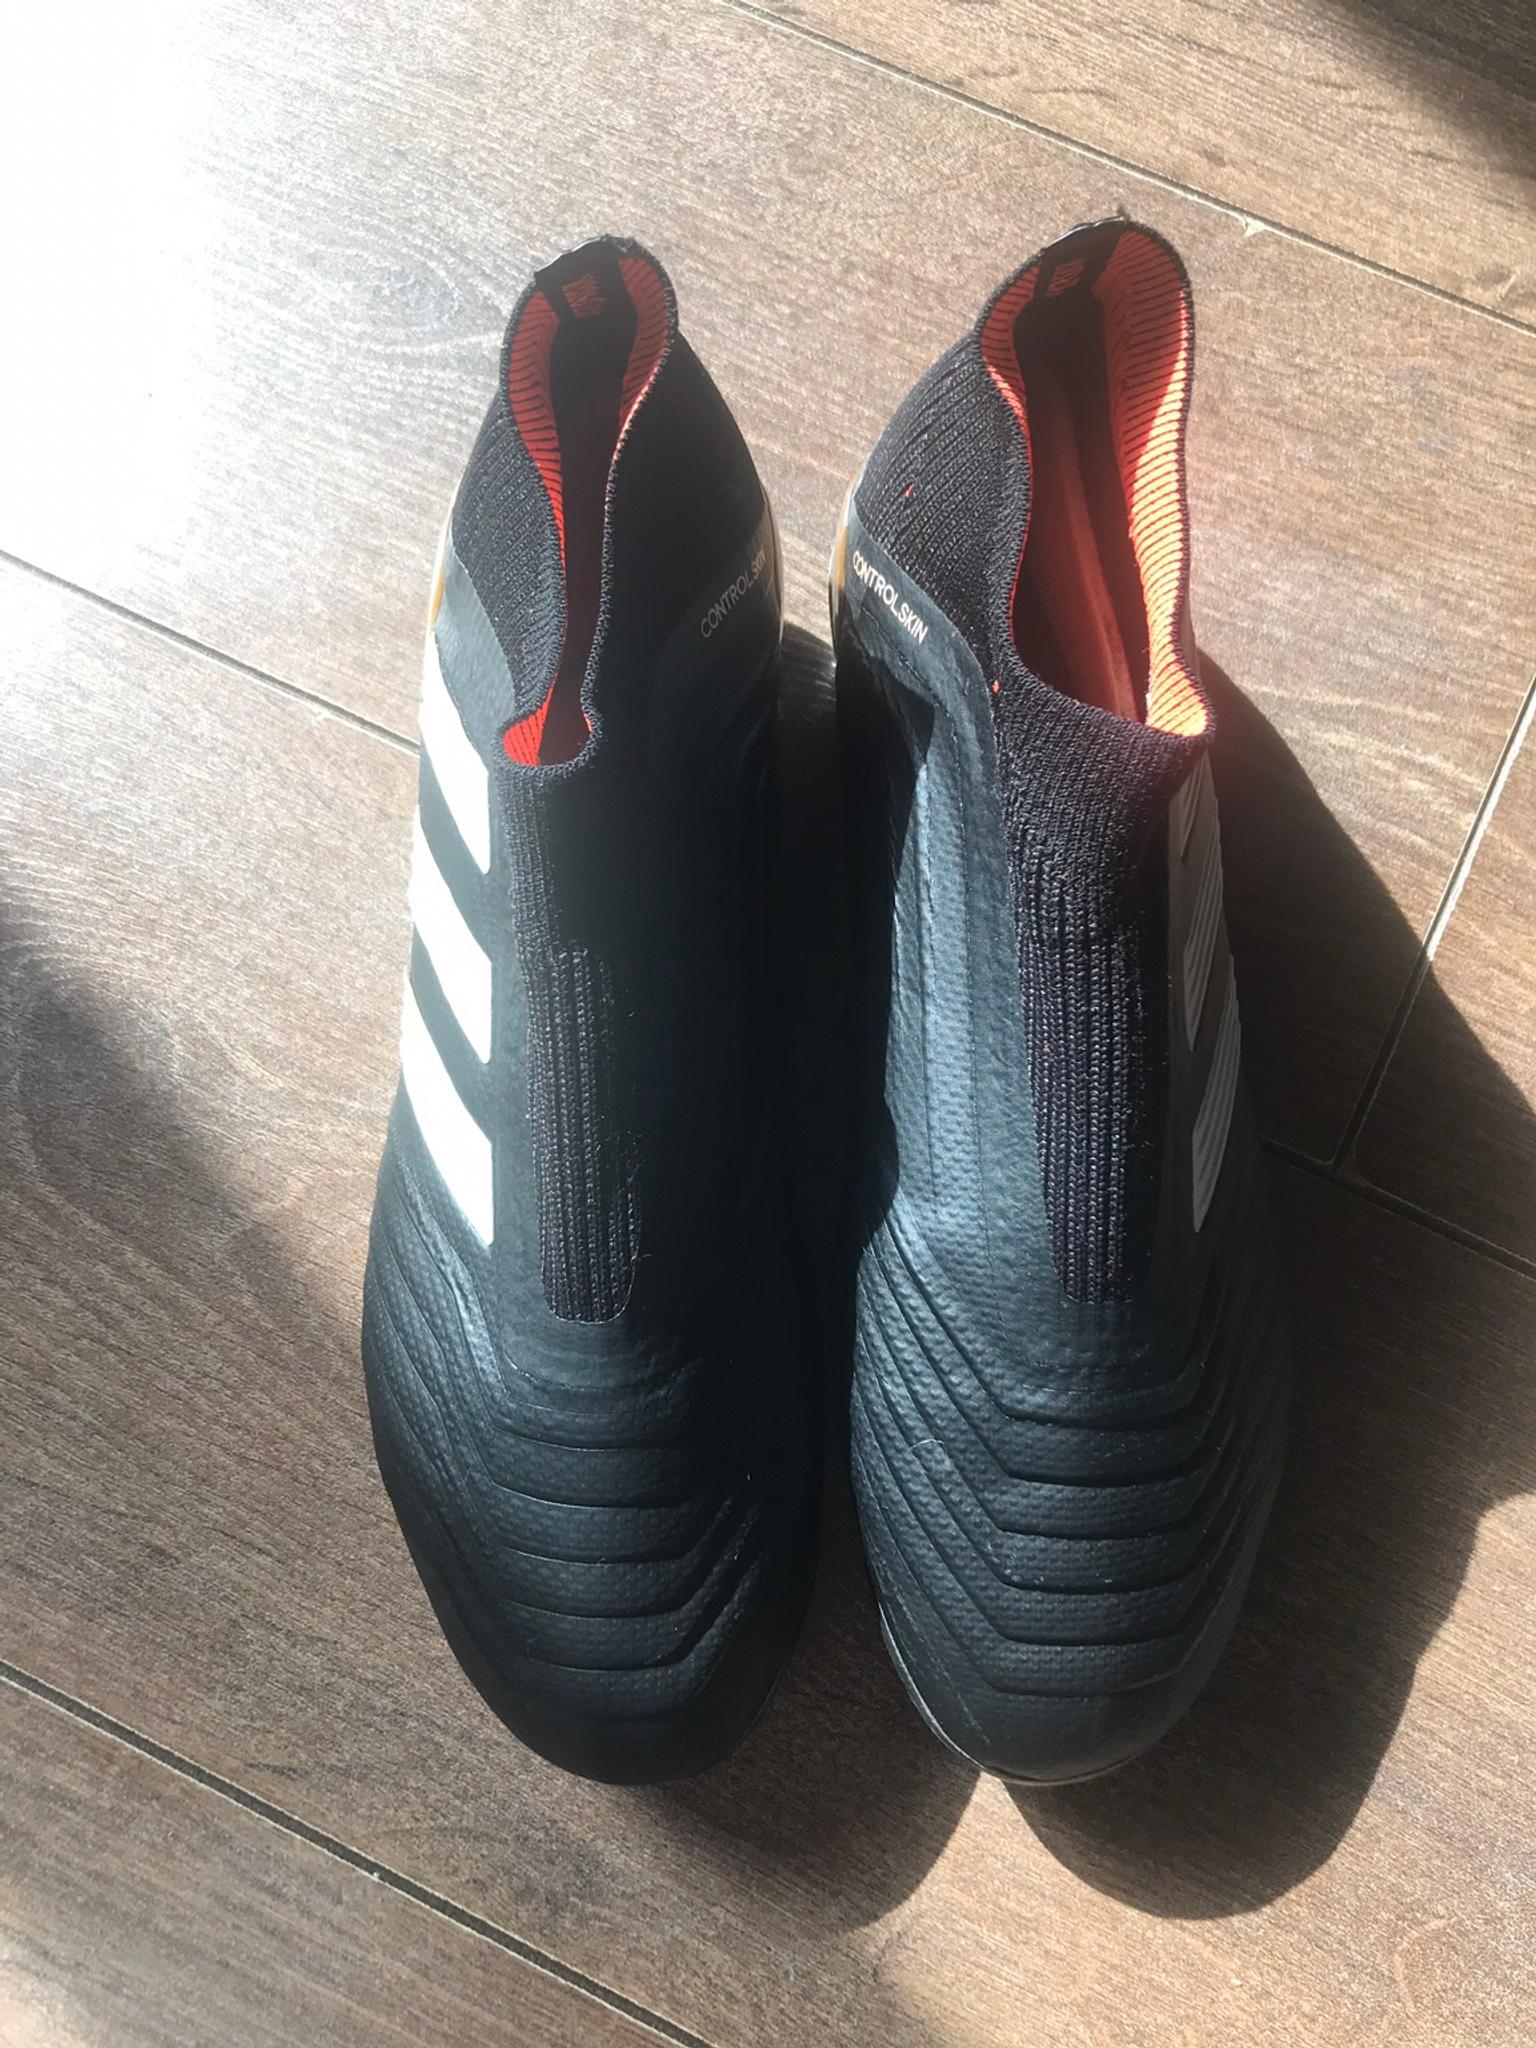 size 5 laceless football boots